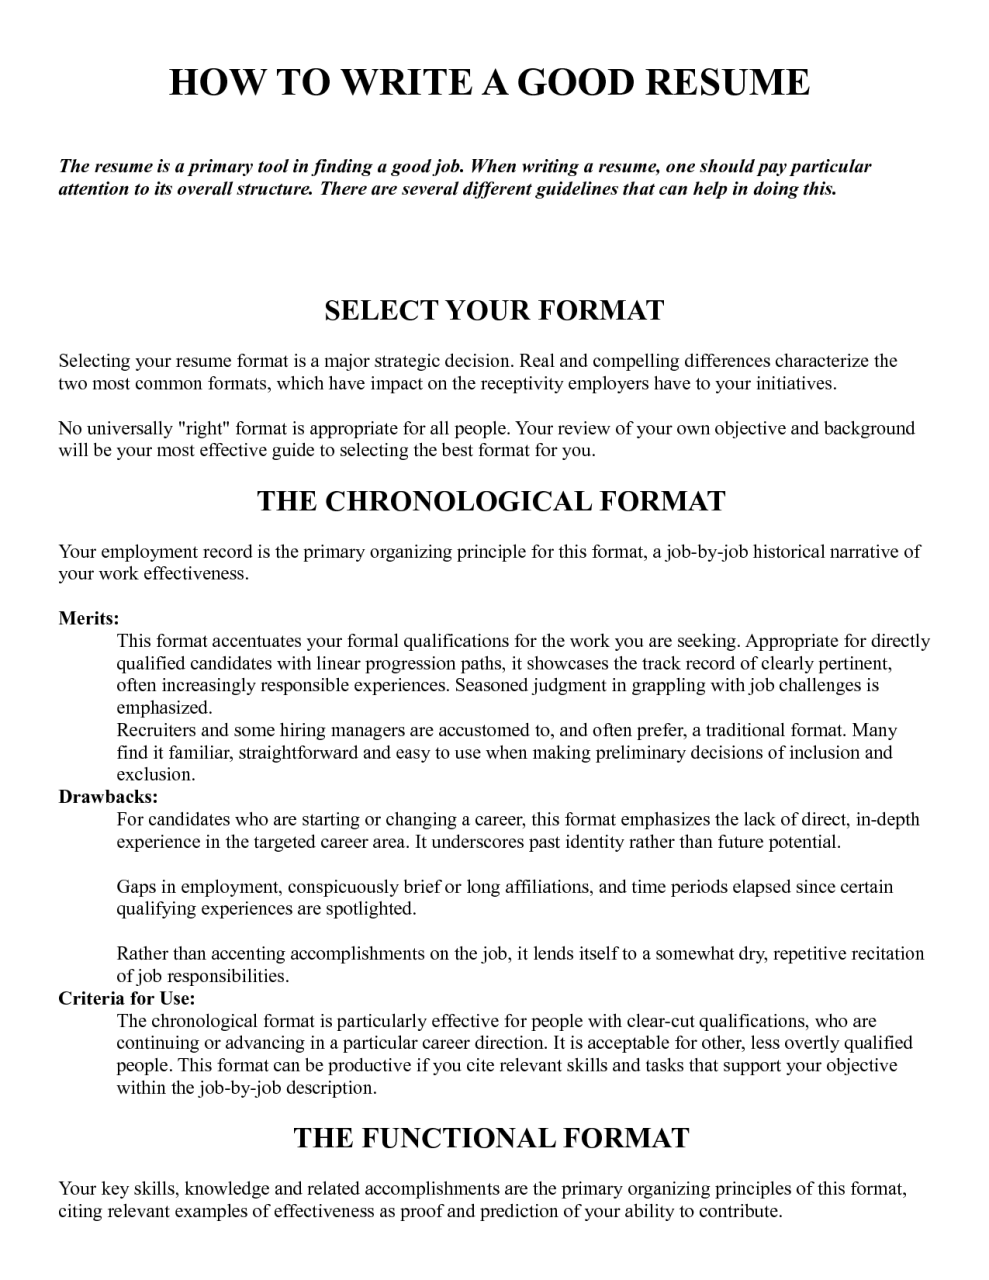 How To Write A Good Resume For A Job